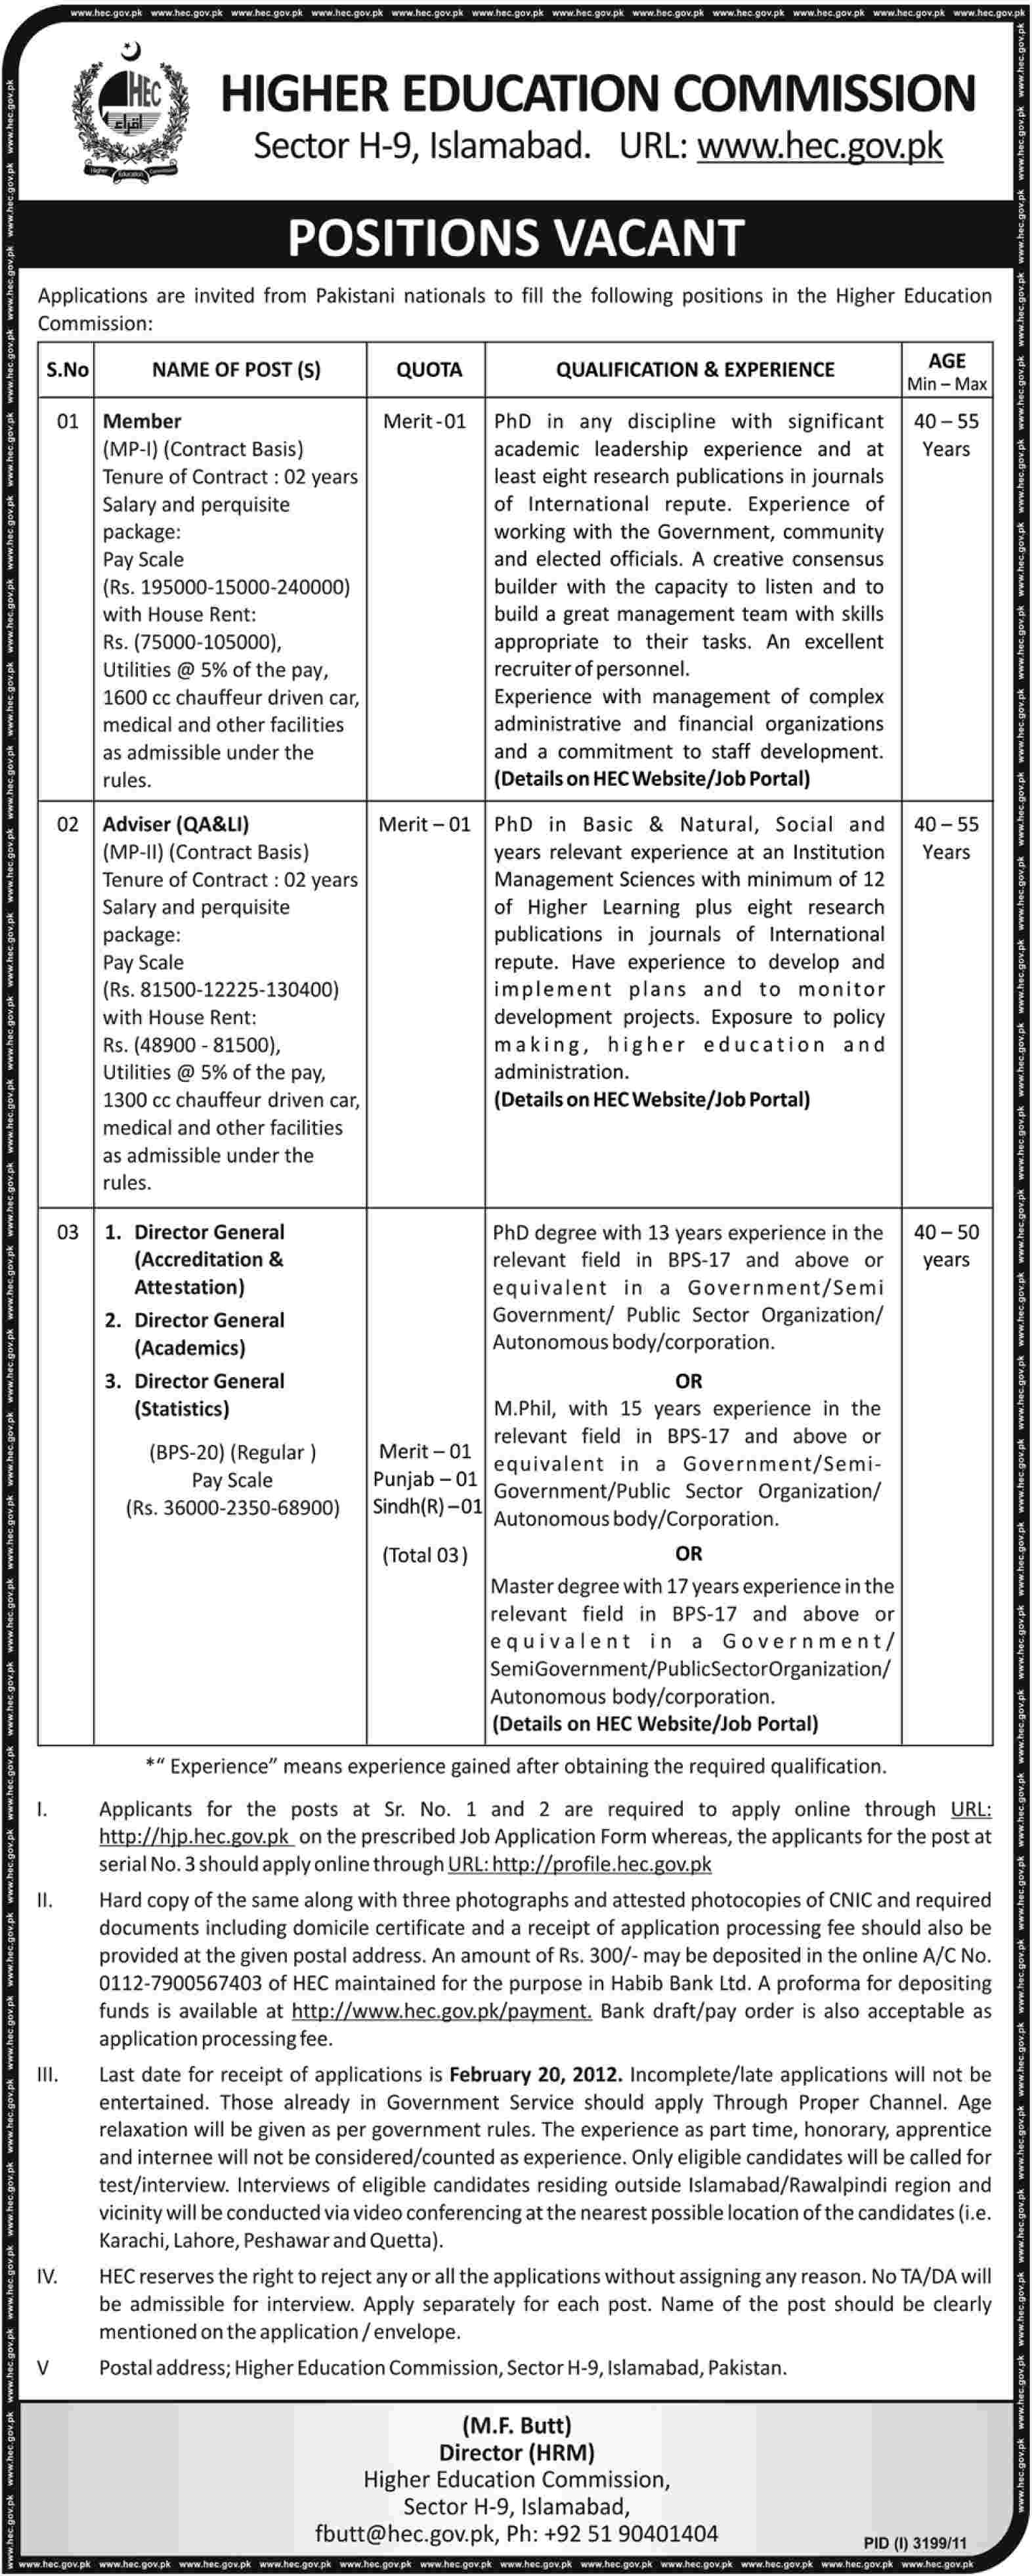 Higher Education Commission Islamabad Jobs Opportunities